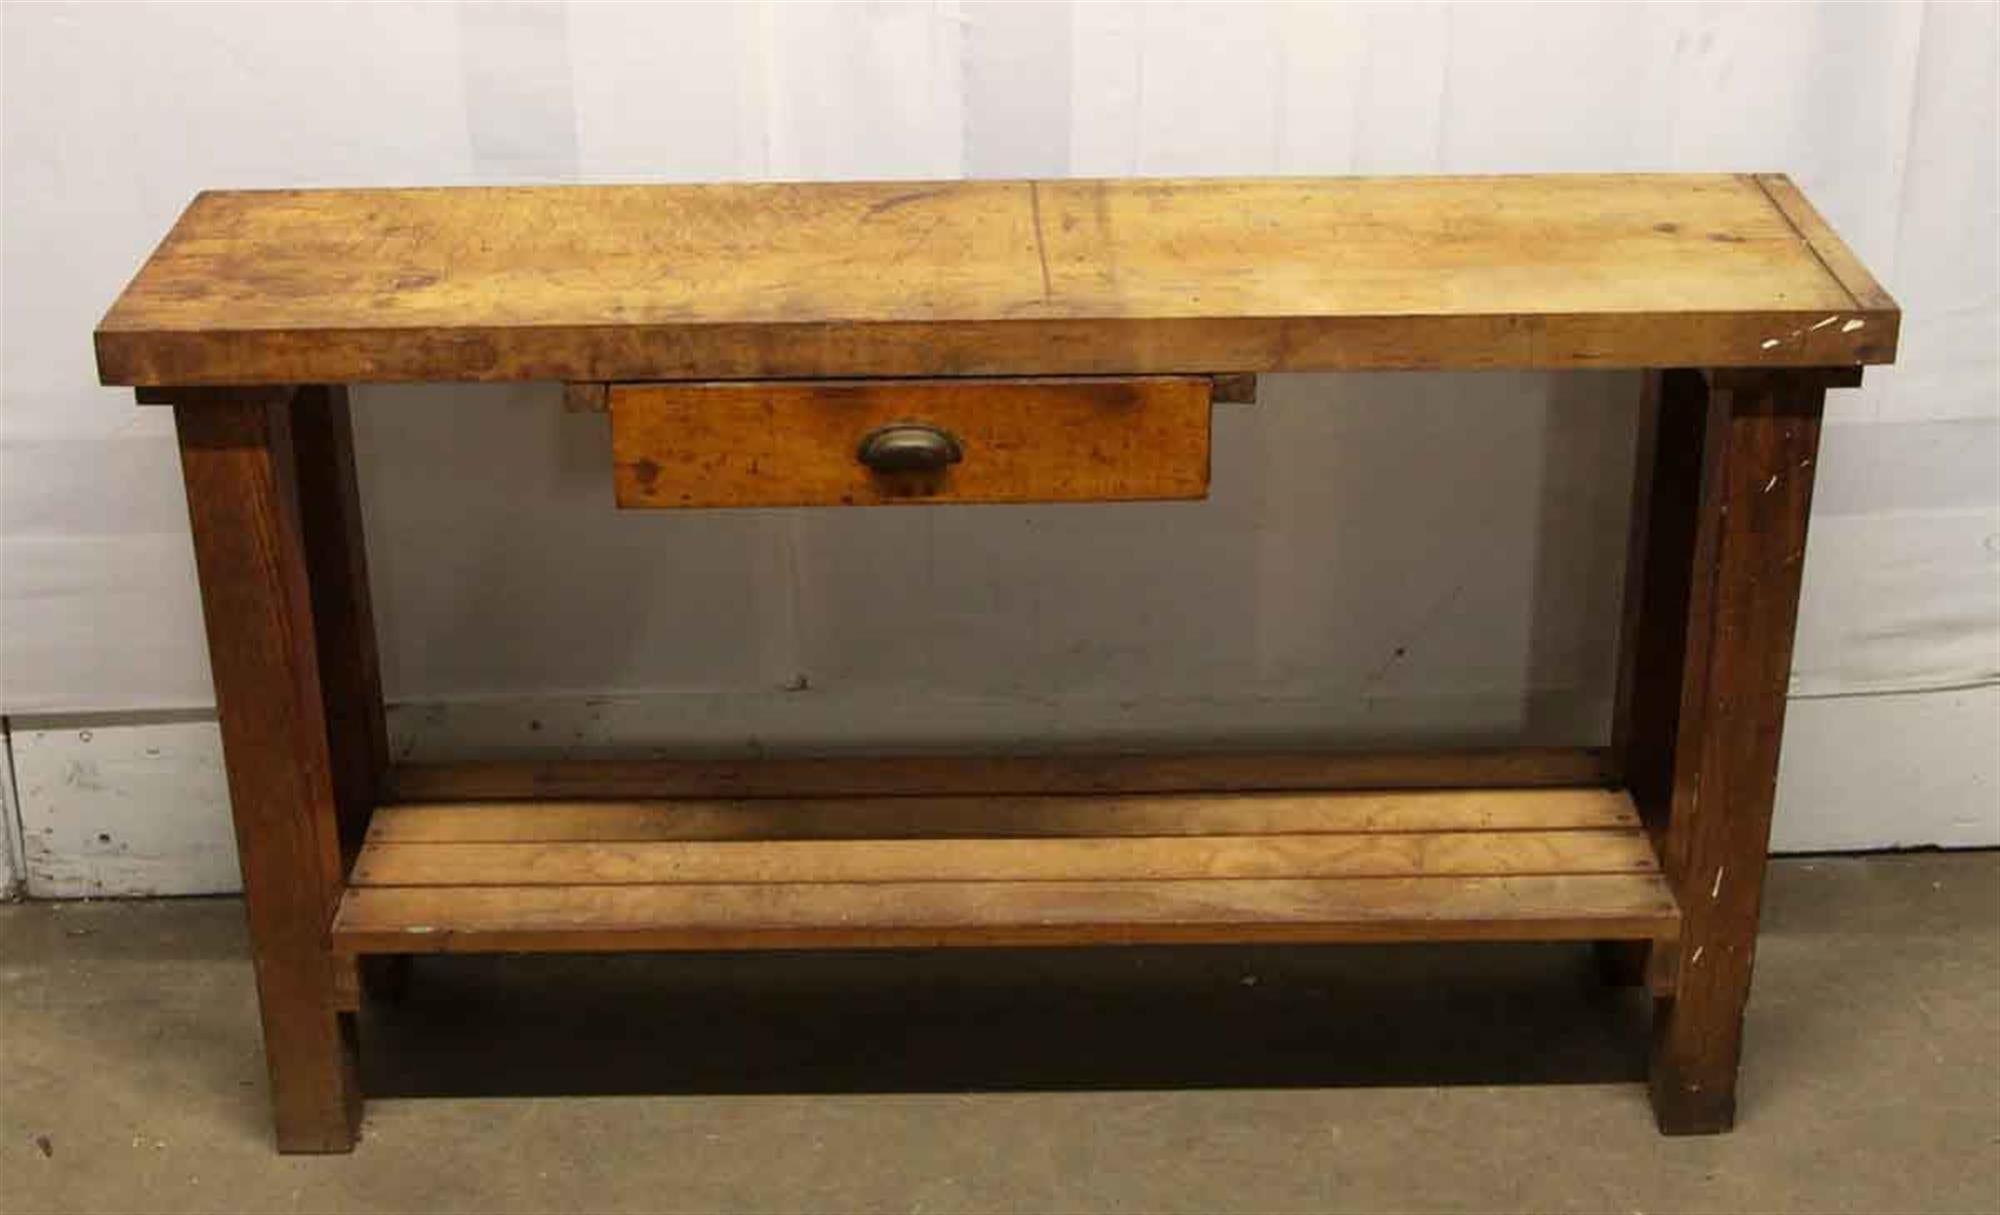 Work table with one single slightly off center drawer and two board shelf. Original distressing from the 1950s. This can be seen at our 302 Bowery location in Manhattan.